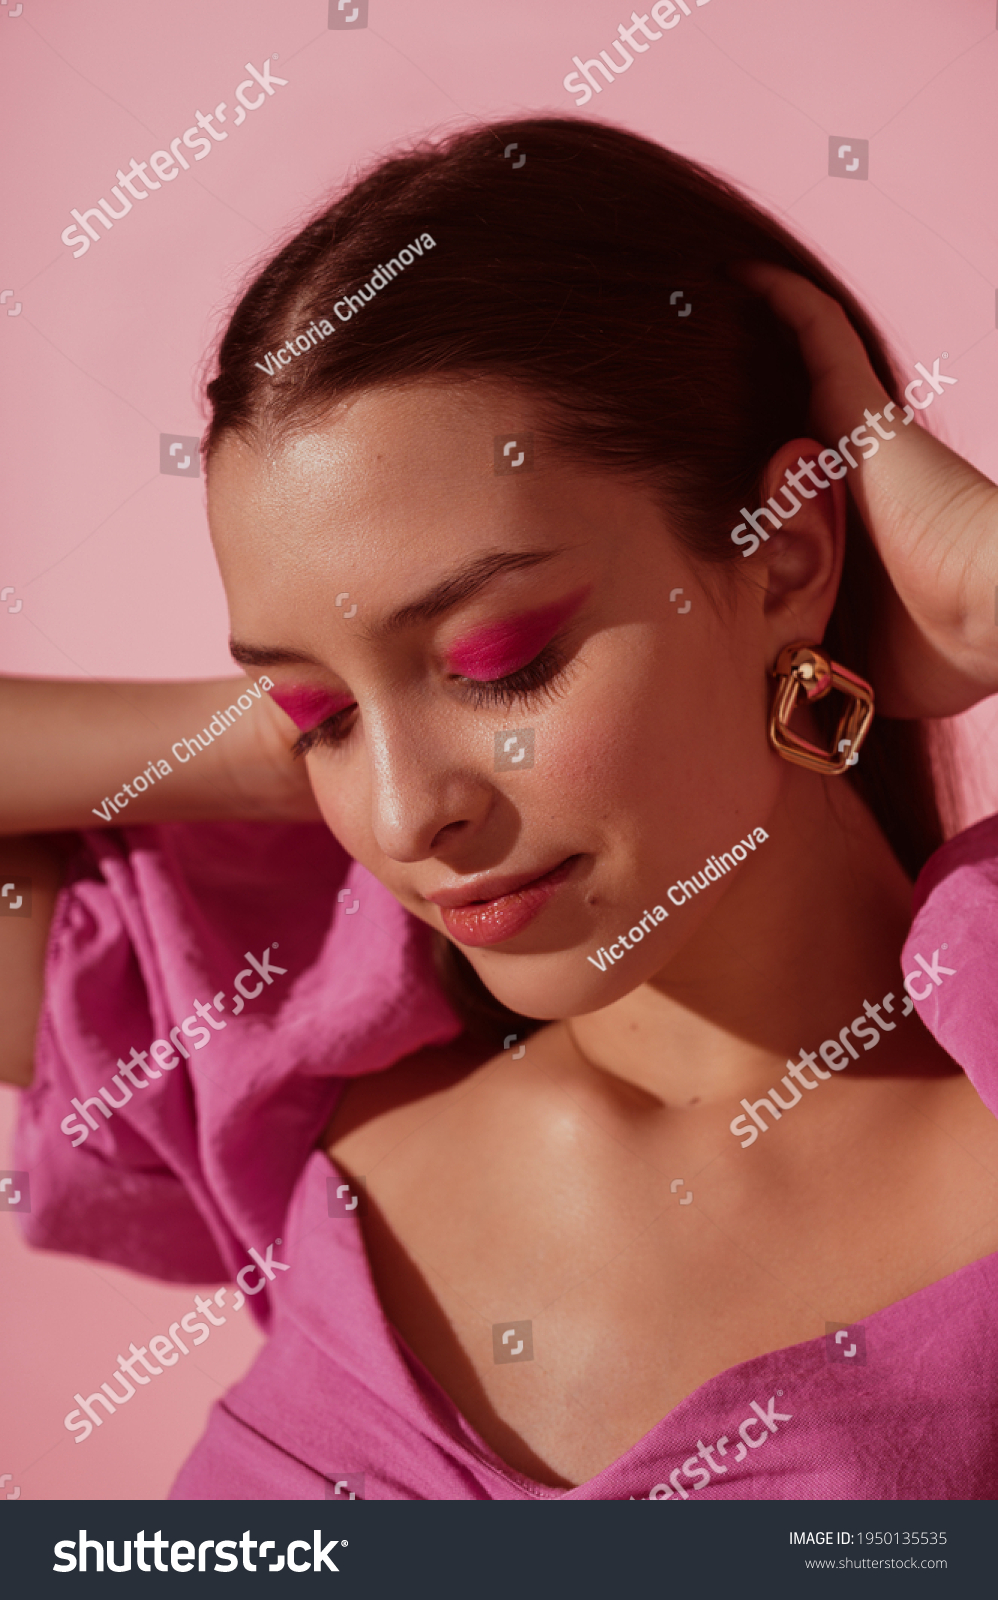 Close up beauty portrait of young beautiful woman with pink, fuchsia color eyeshadow makeup, flawless clean skin, wearing elegant golden earrings, pink blouse. Spring, summer fashion trend #1950135535